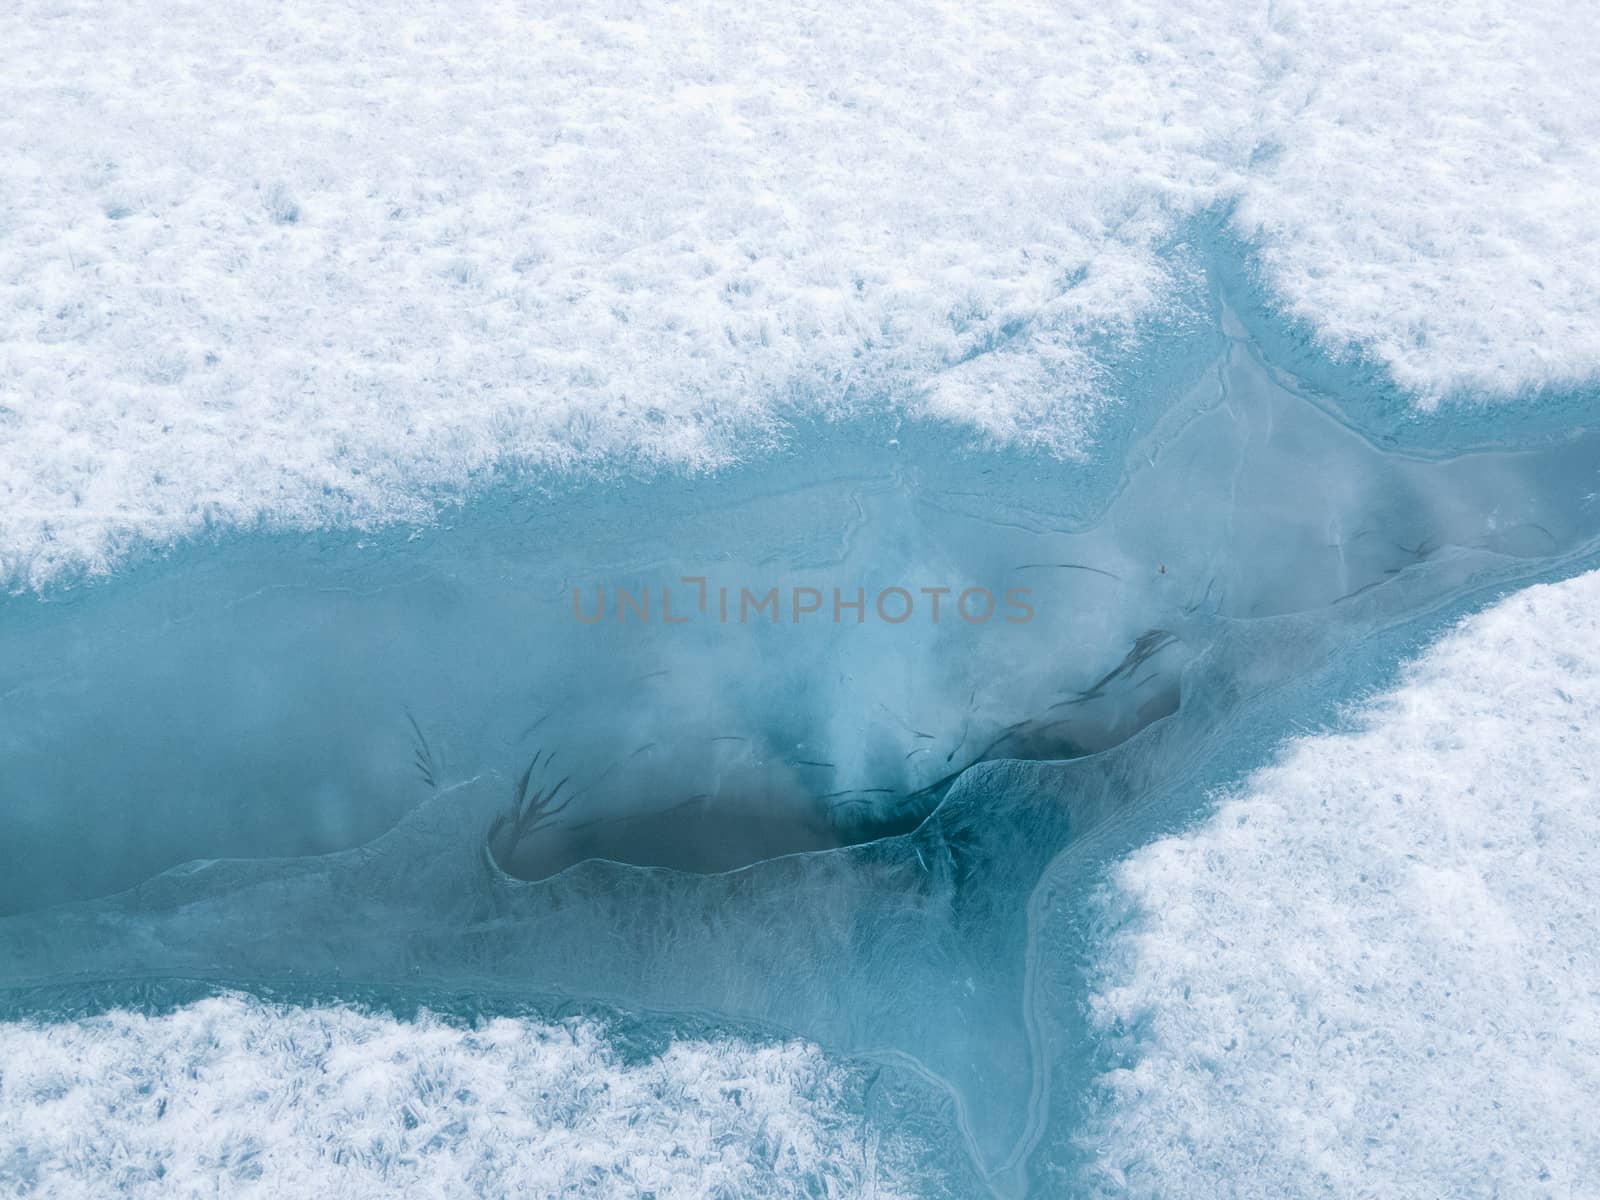 Cracked lake ice sheet nature background pattern by PiLens